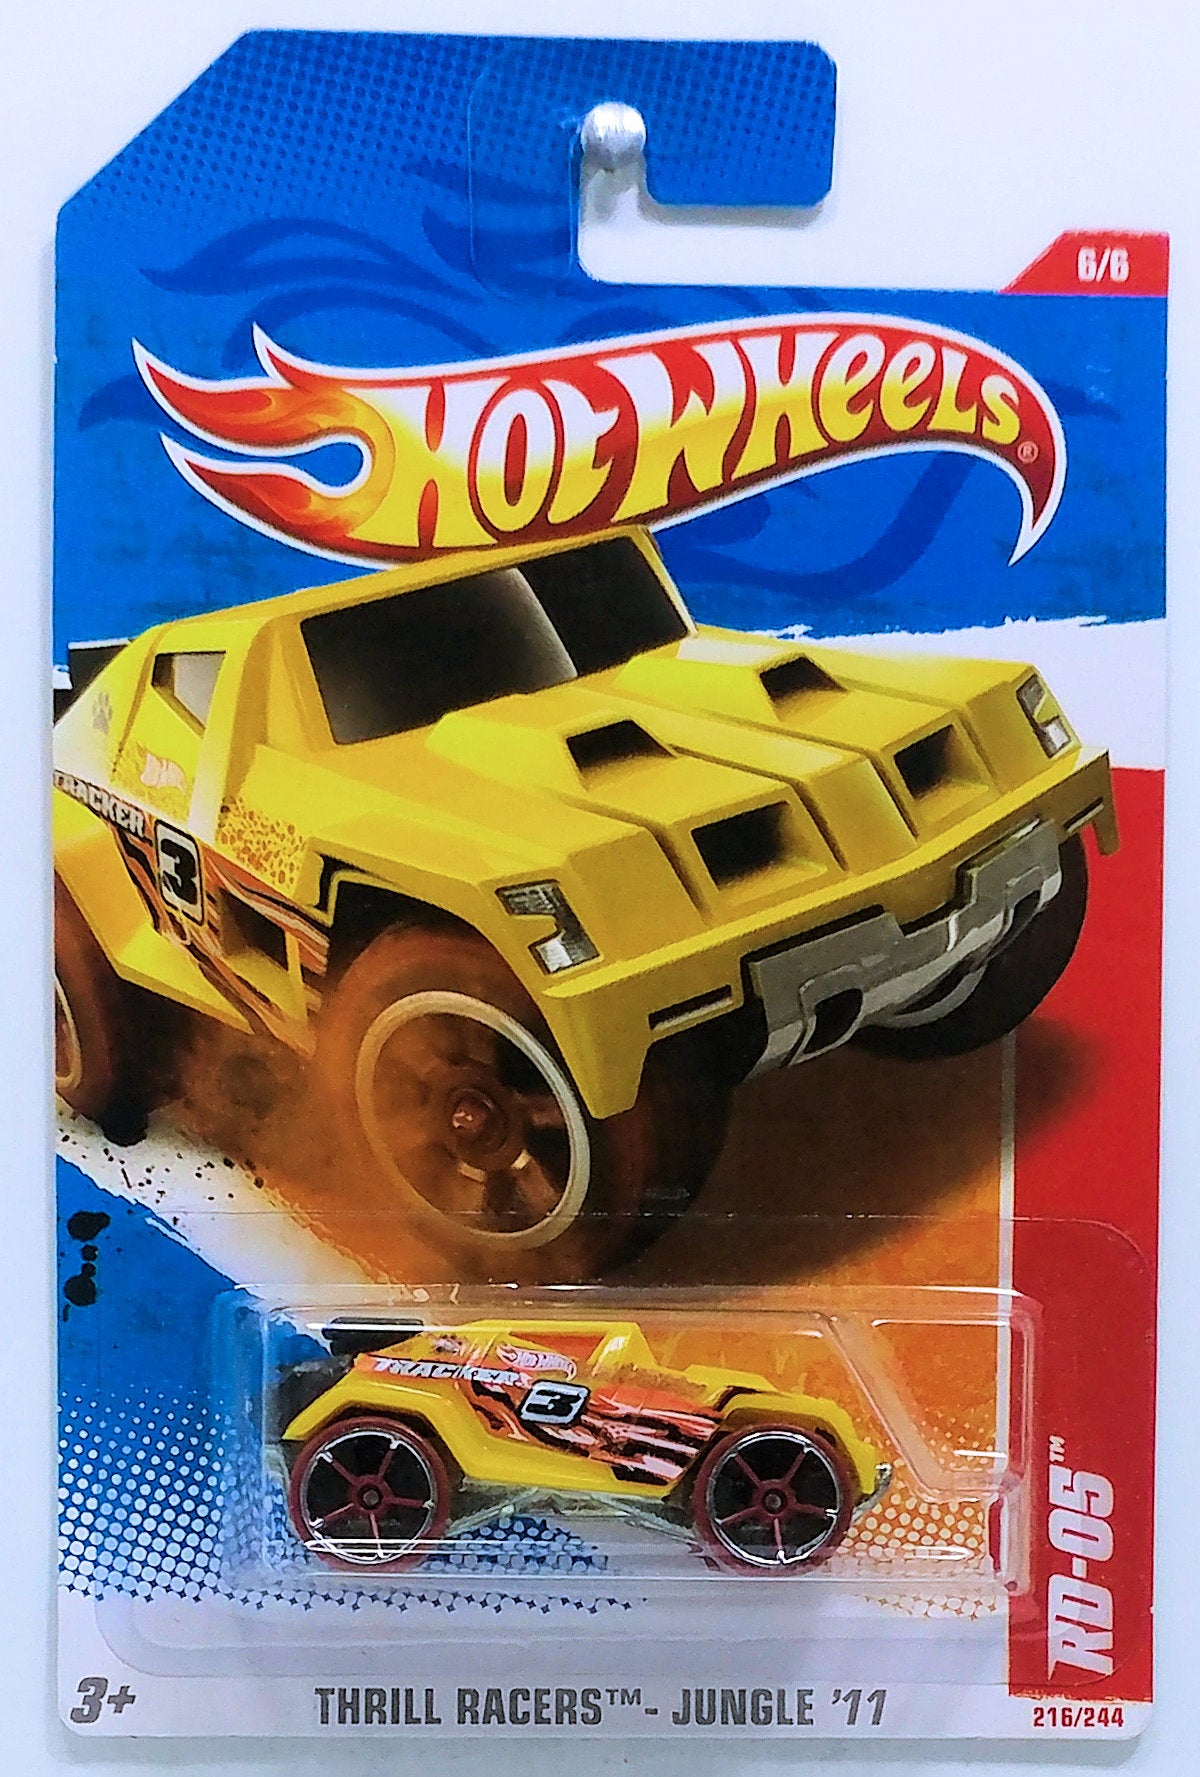 Hot Wheels 2011 - Collector # 216/244 - Thrill Racers / Jungle '11 6/6 - RD-05 - Butterscotch Yellow - Black Rear Wing - USA Card